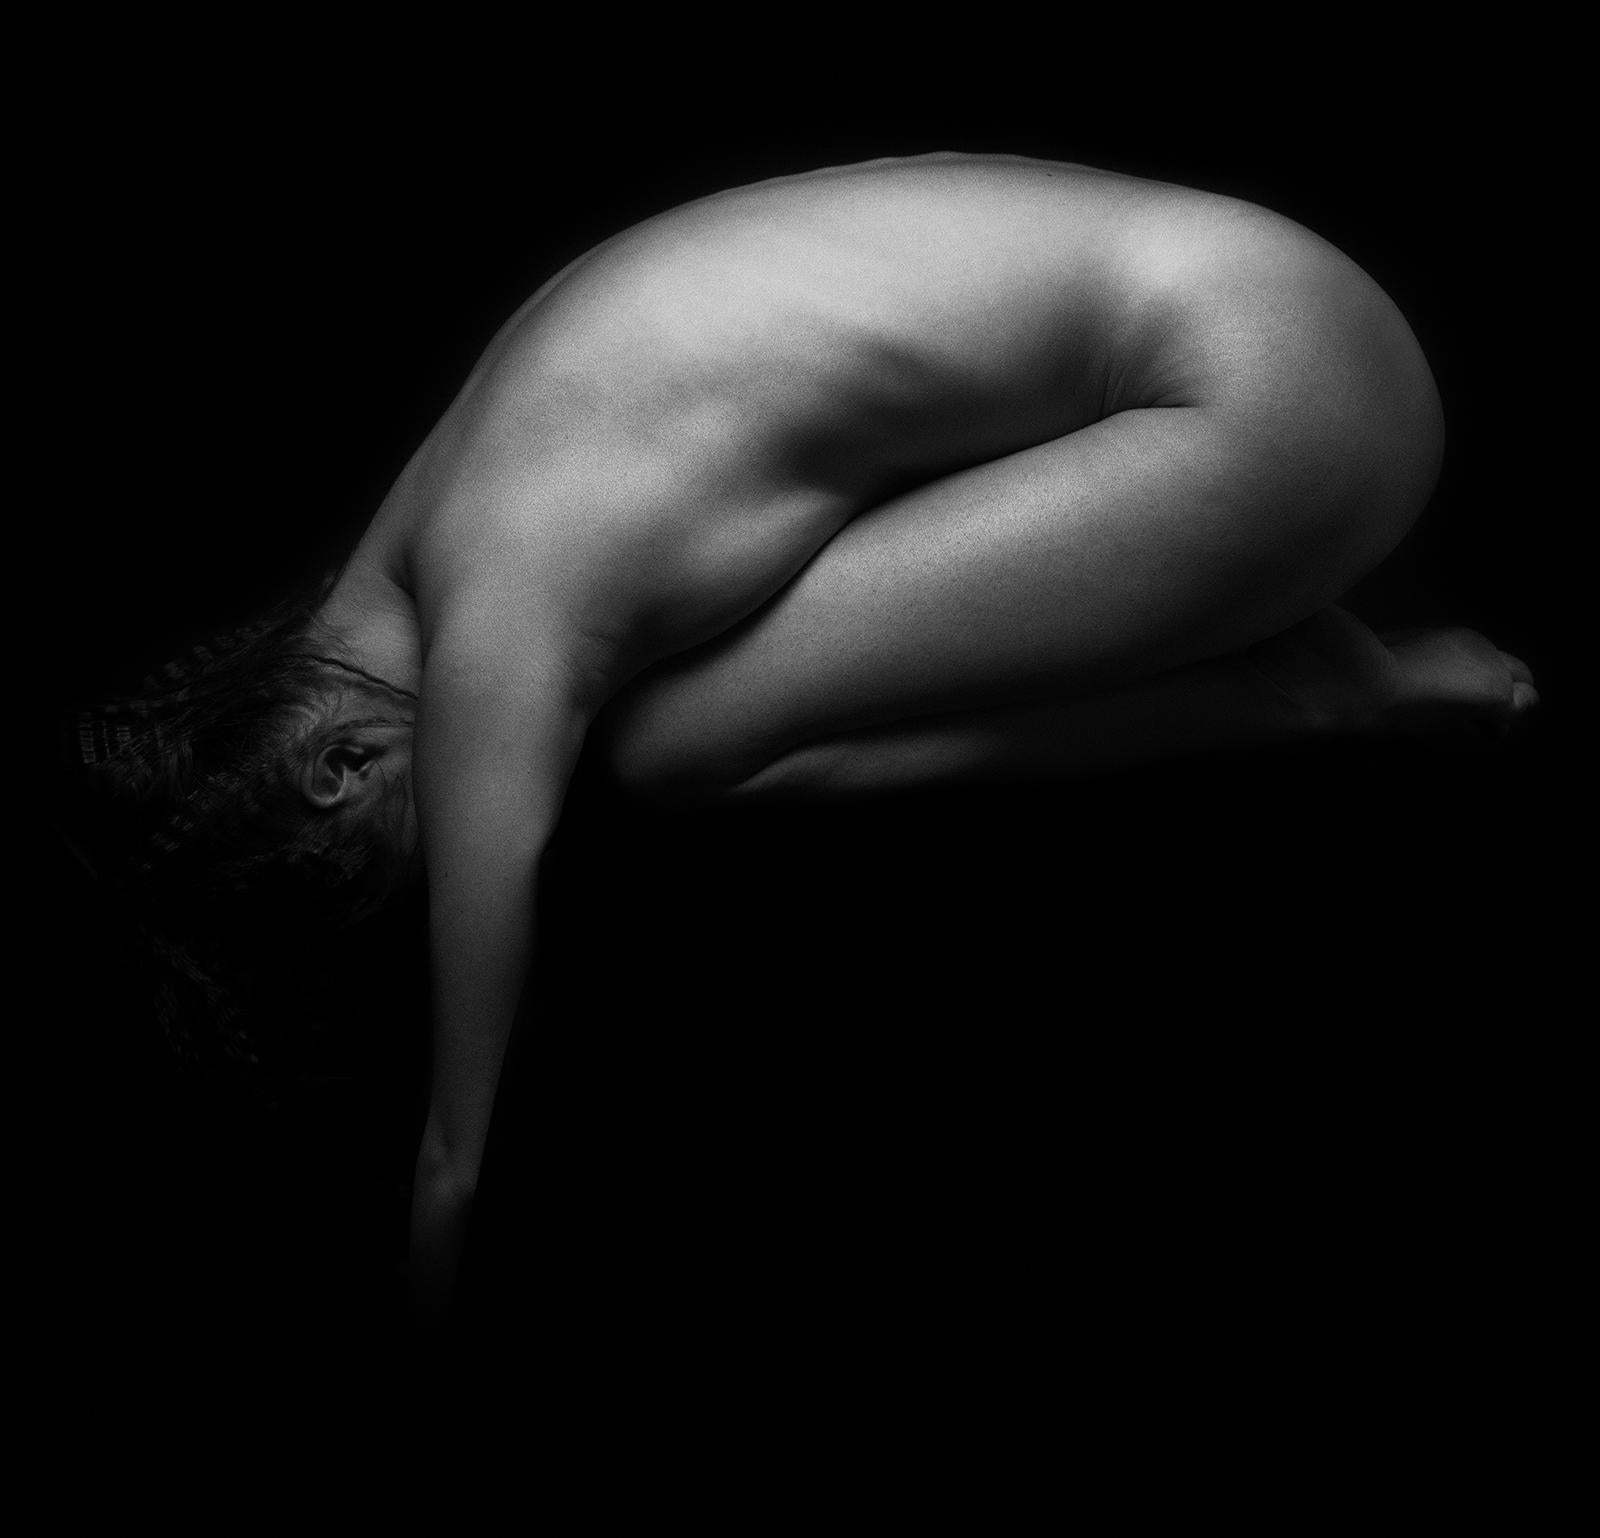 Valérie- Signed limited edition still life print, Black white sexy, Nude, Square - Contemporary Photograph by Ian Sanderson